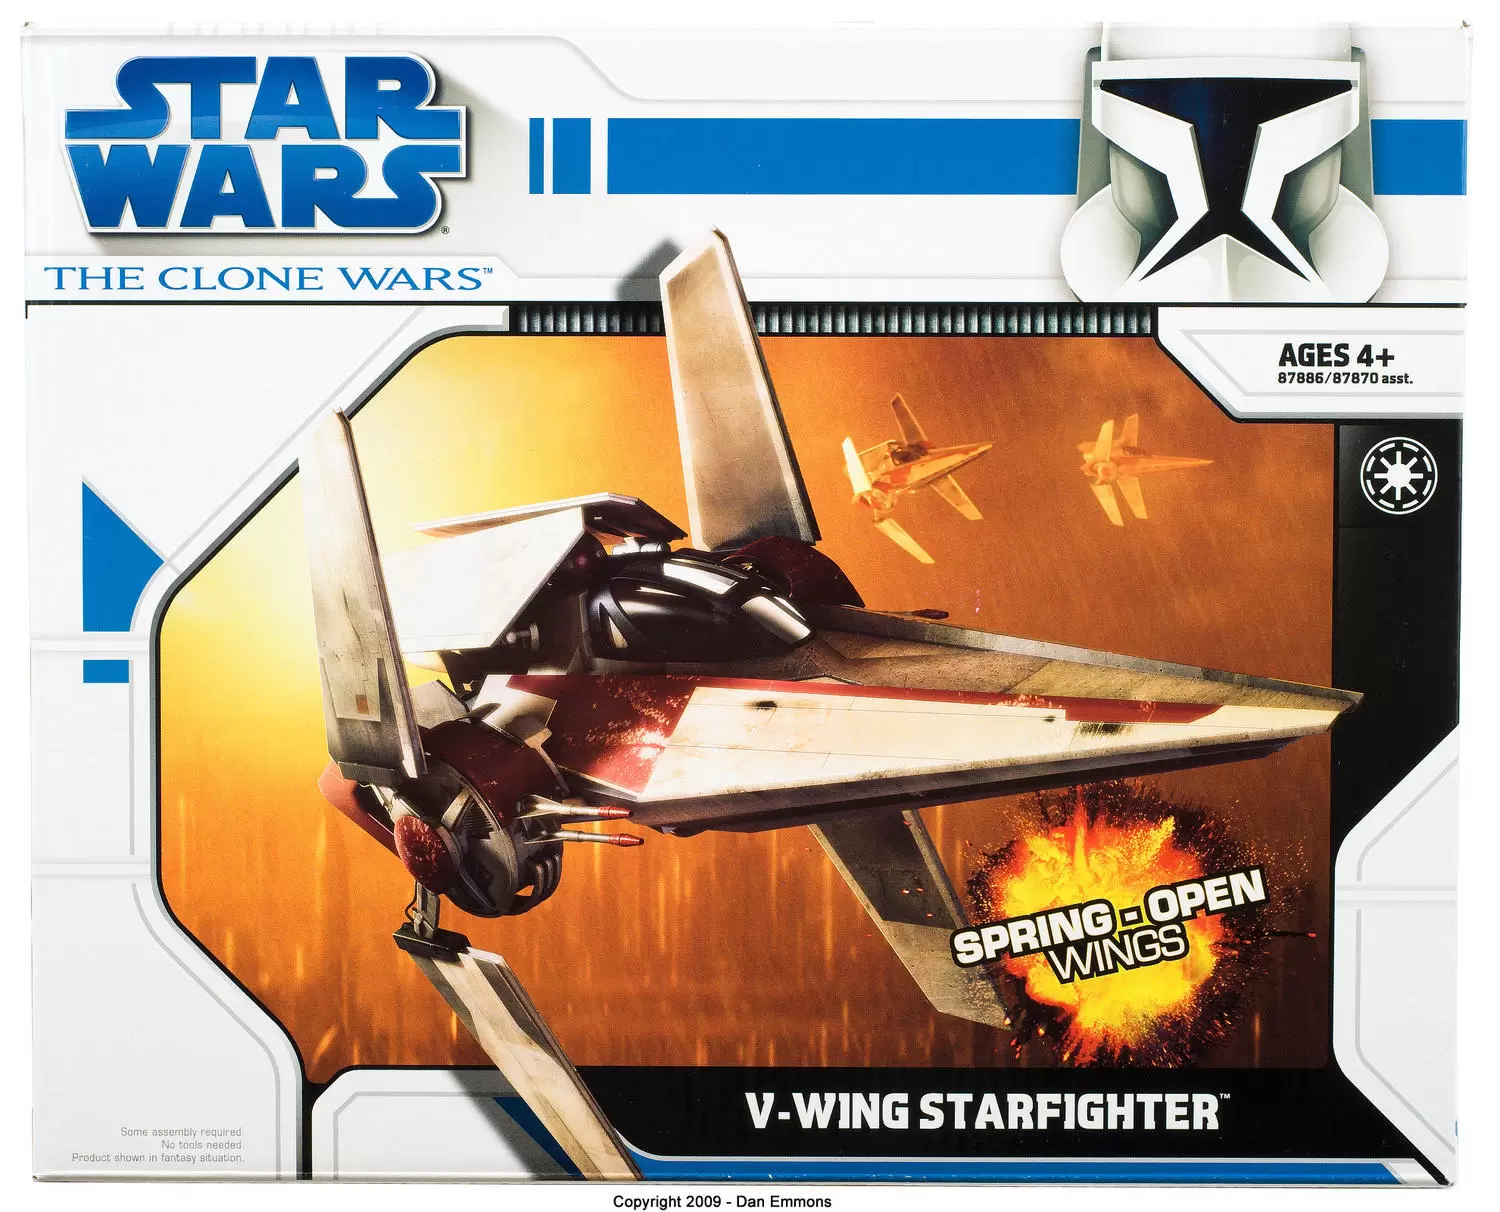 The Clone Wars (TCW 2008) - V-Wing Starfighter